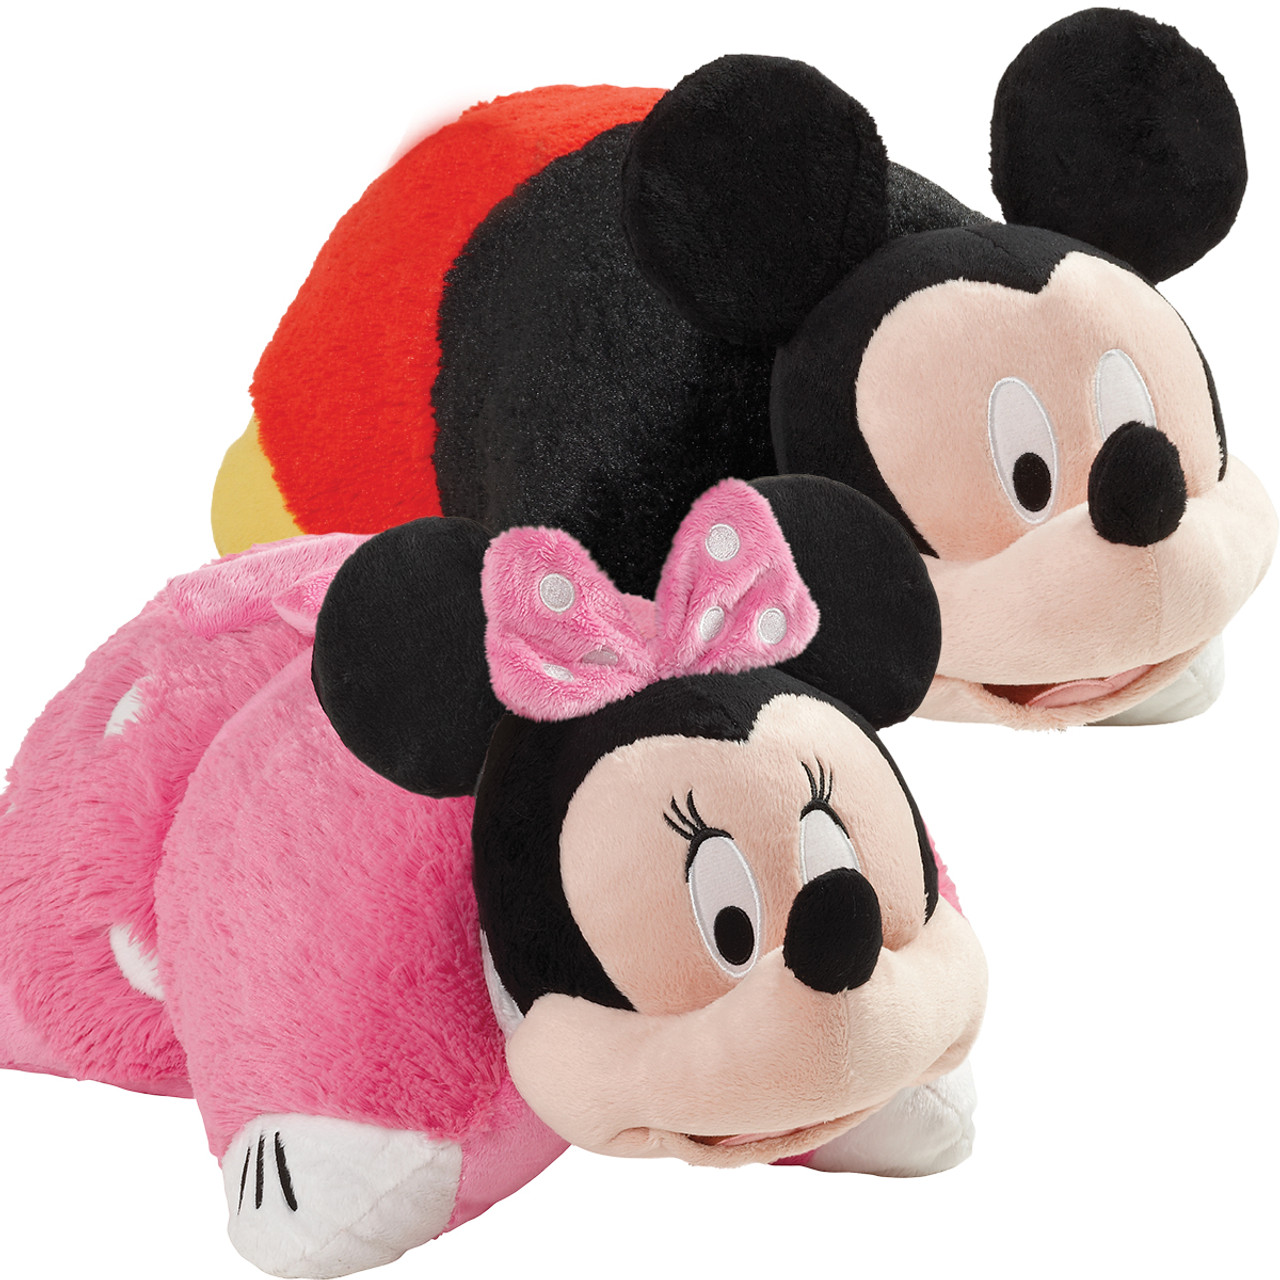 Disney's Mickey Mouse Stuffed Animal Plush Toy by Pillow Pets